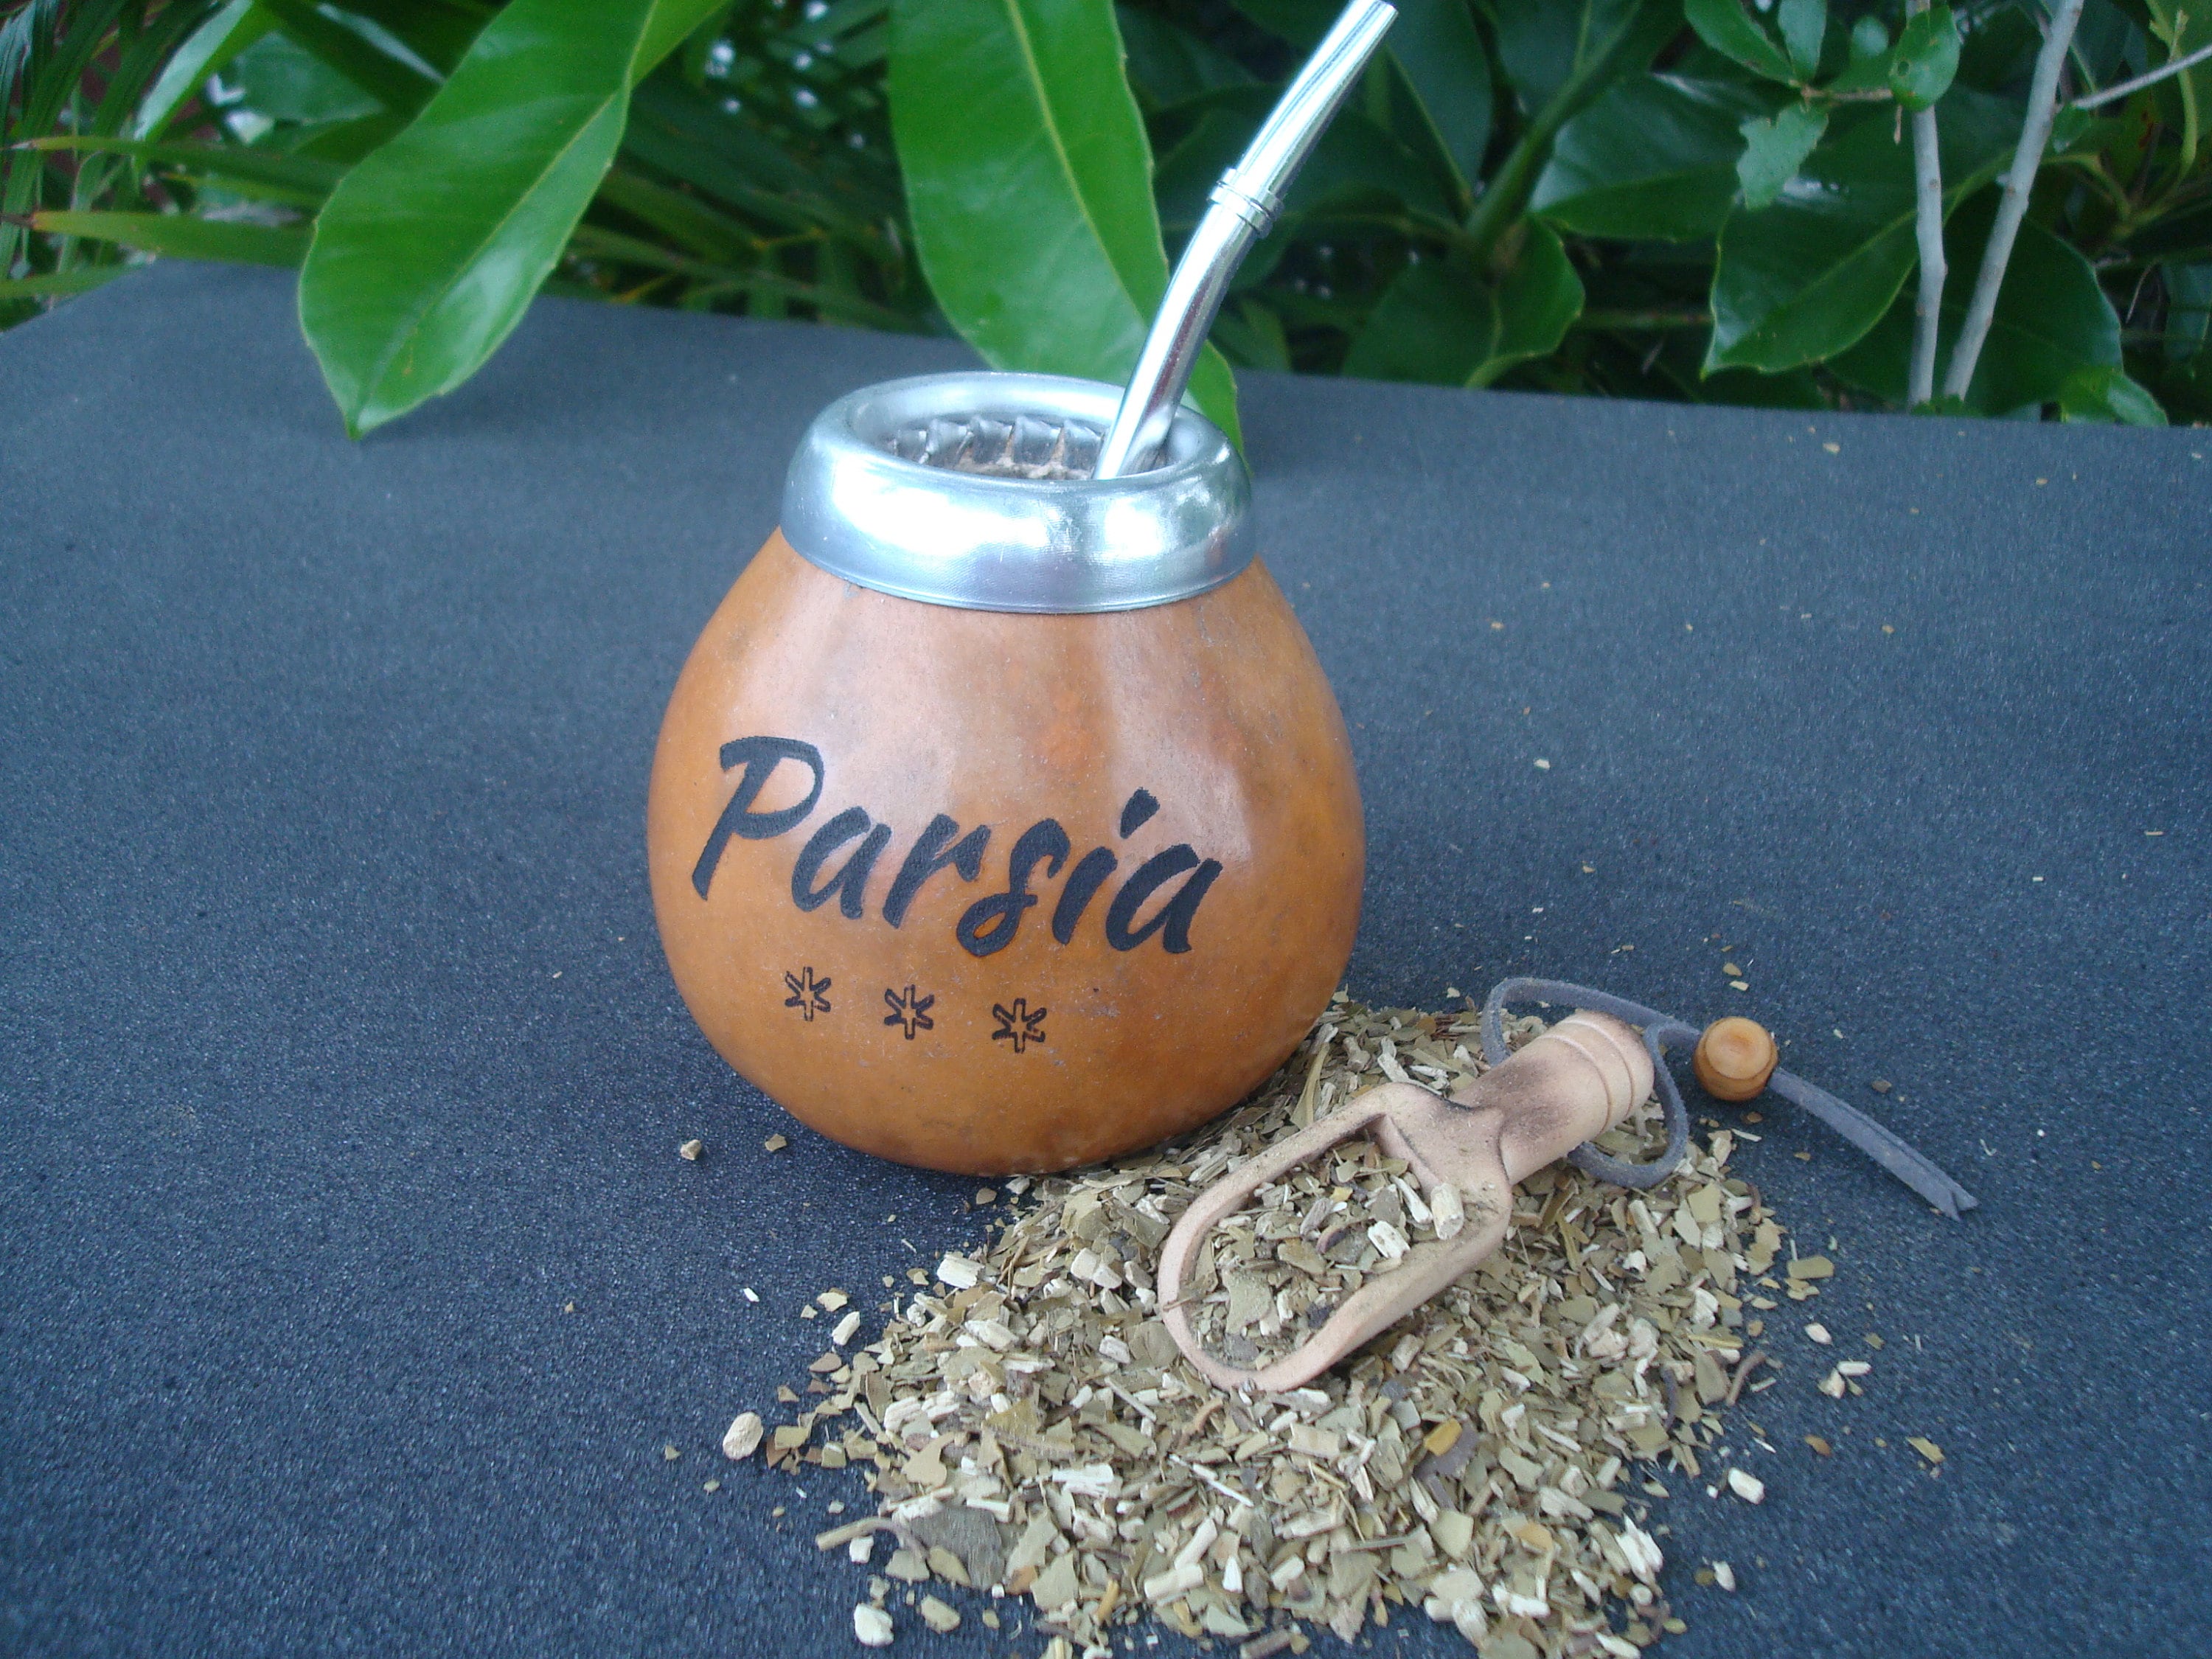 Leather & Calebasse Mate Gourd + Personalized Straw